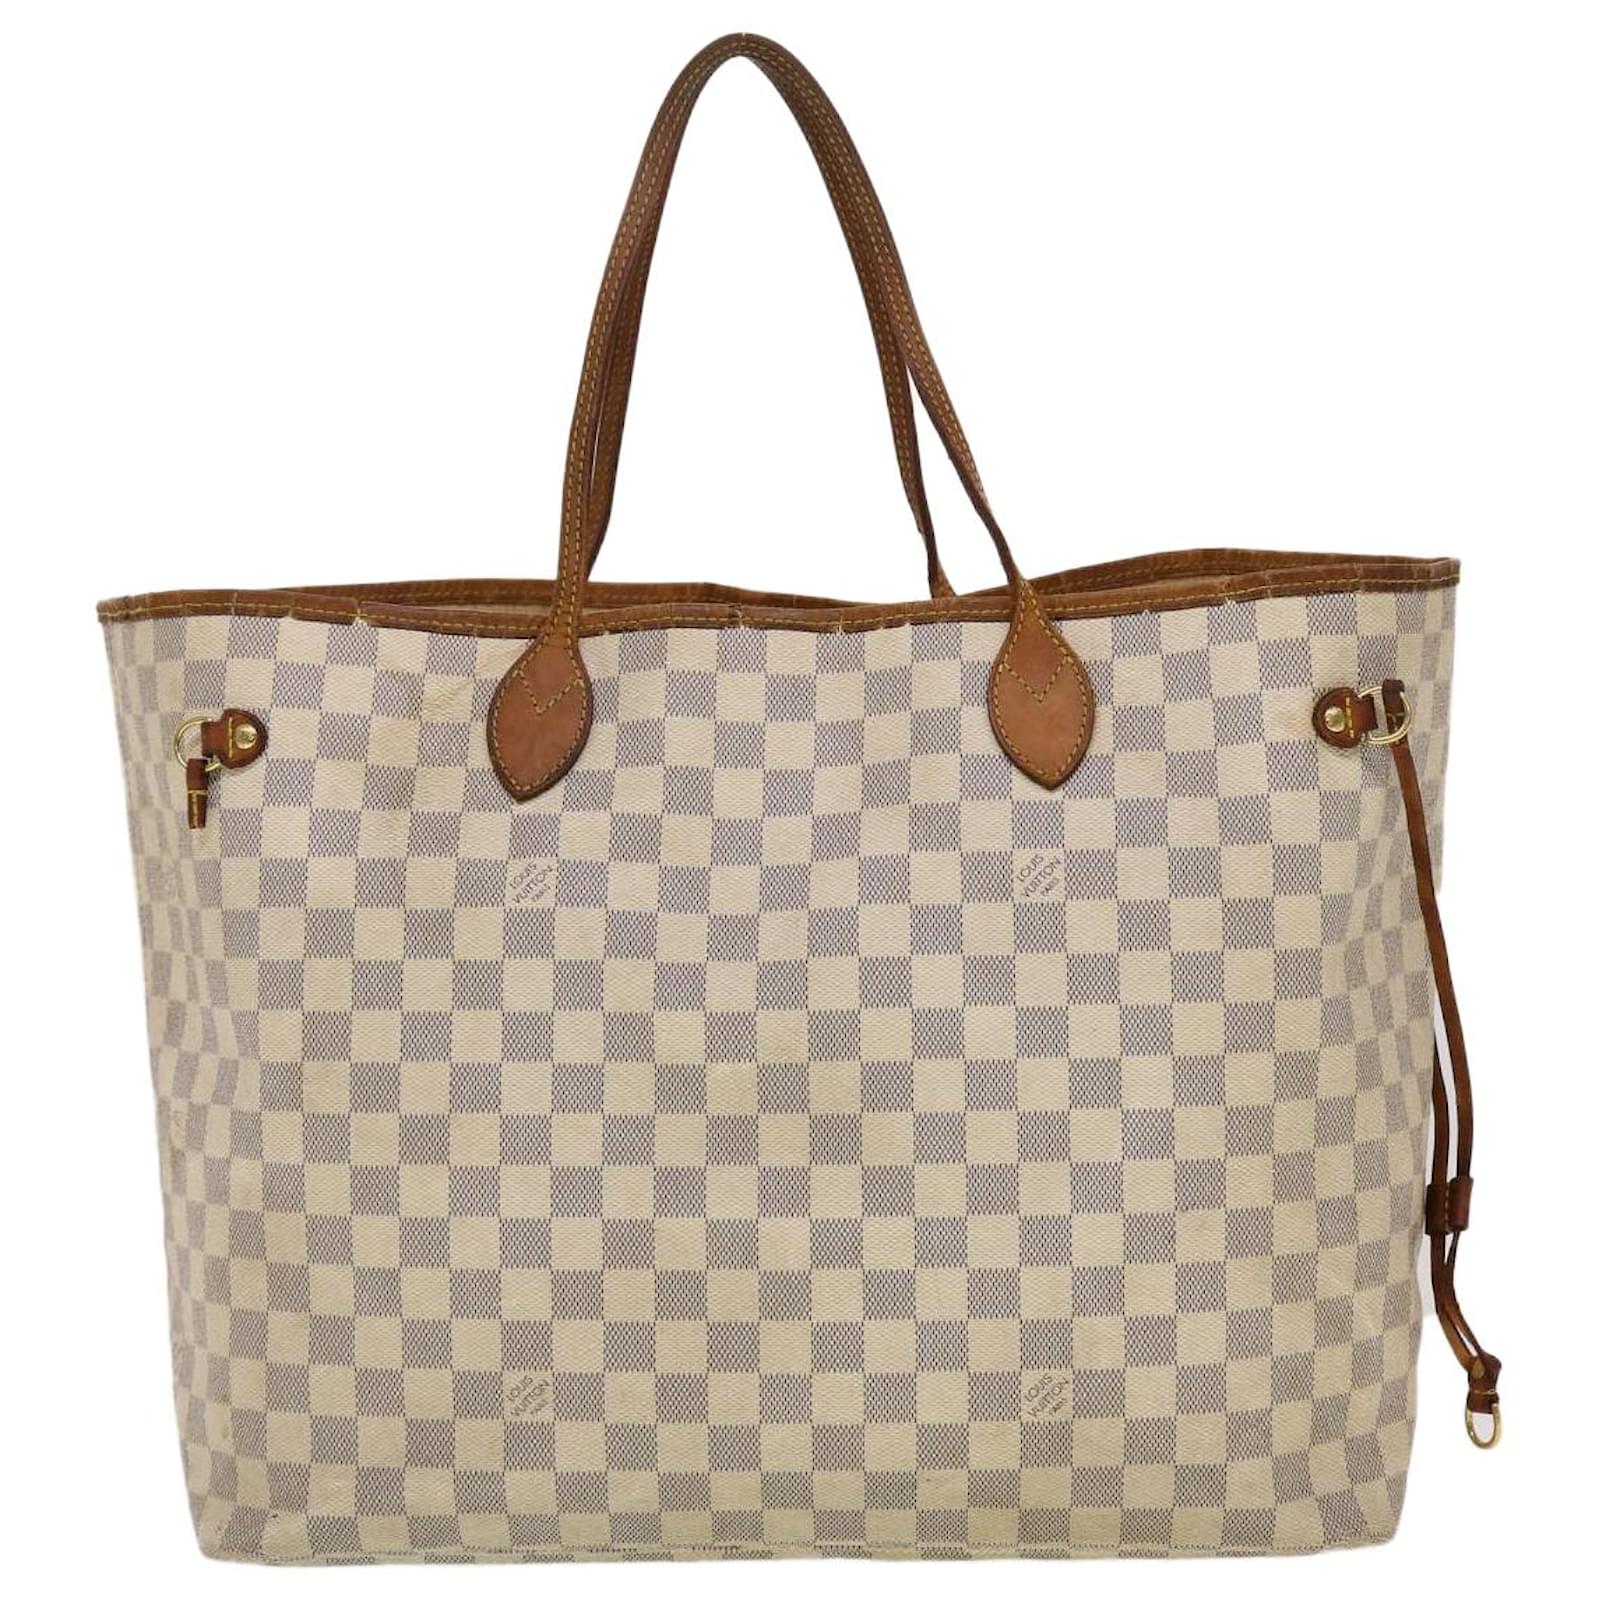 LOUIS VUITTON Epi Neverfull MM Tote Bag Mimosa M40957 LV Auth 47429